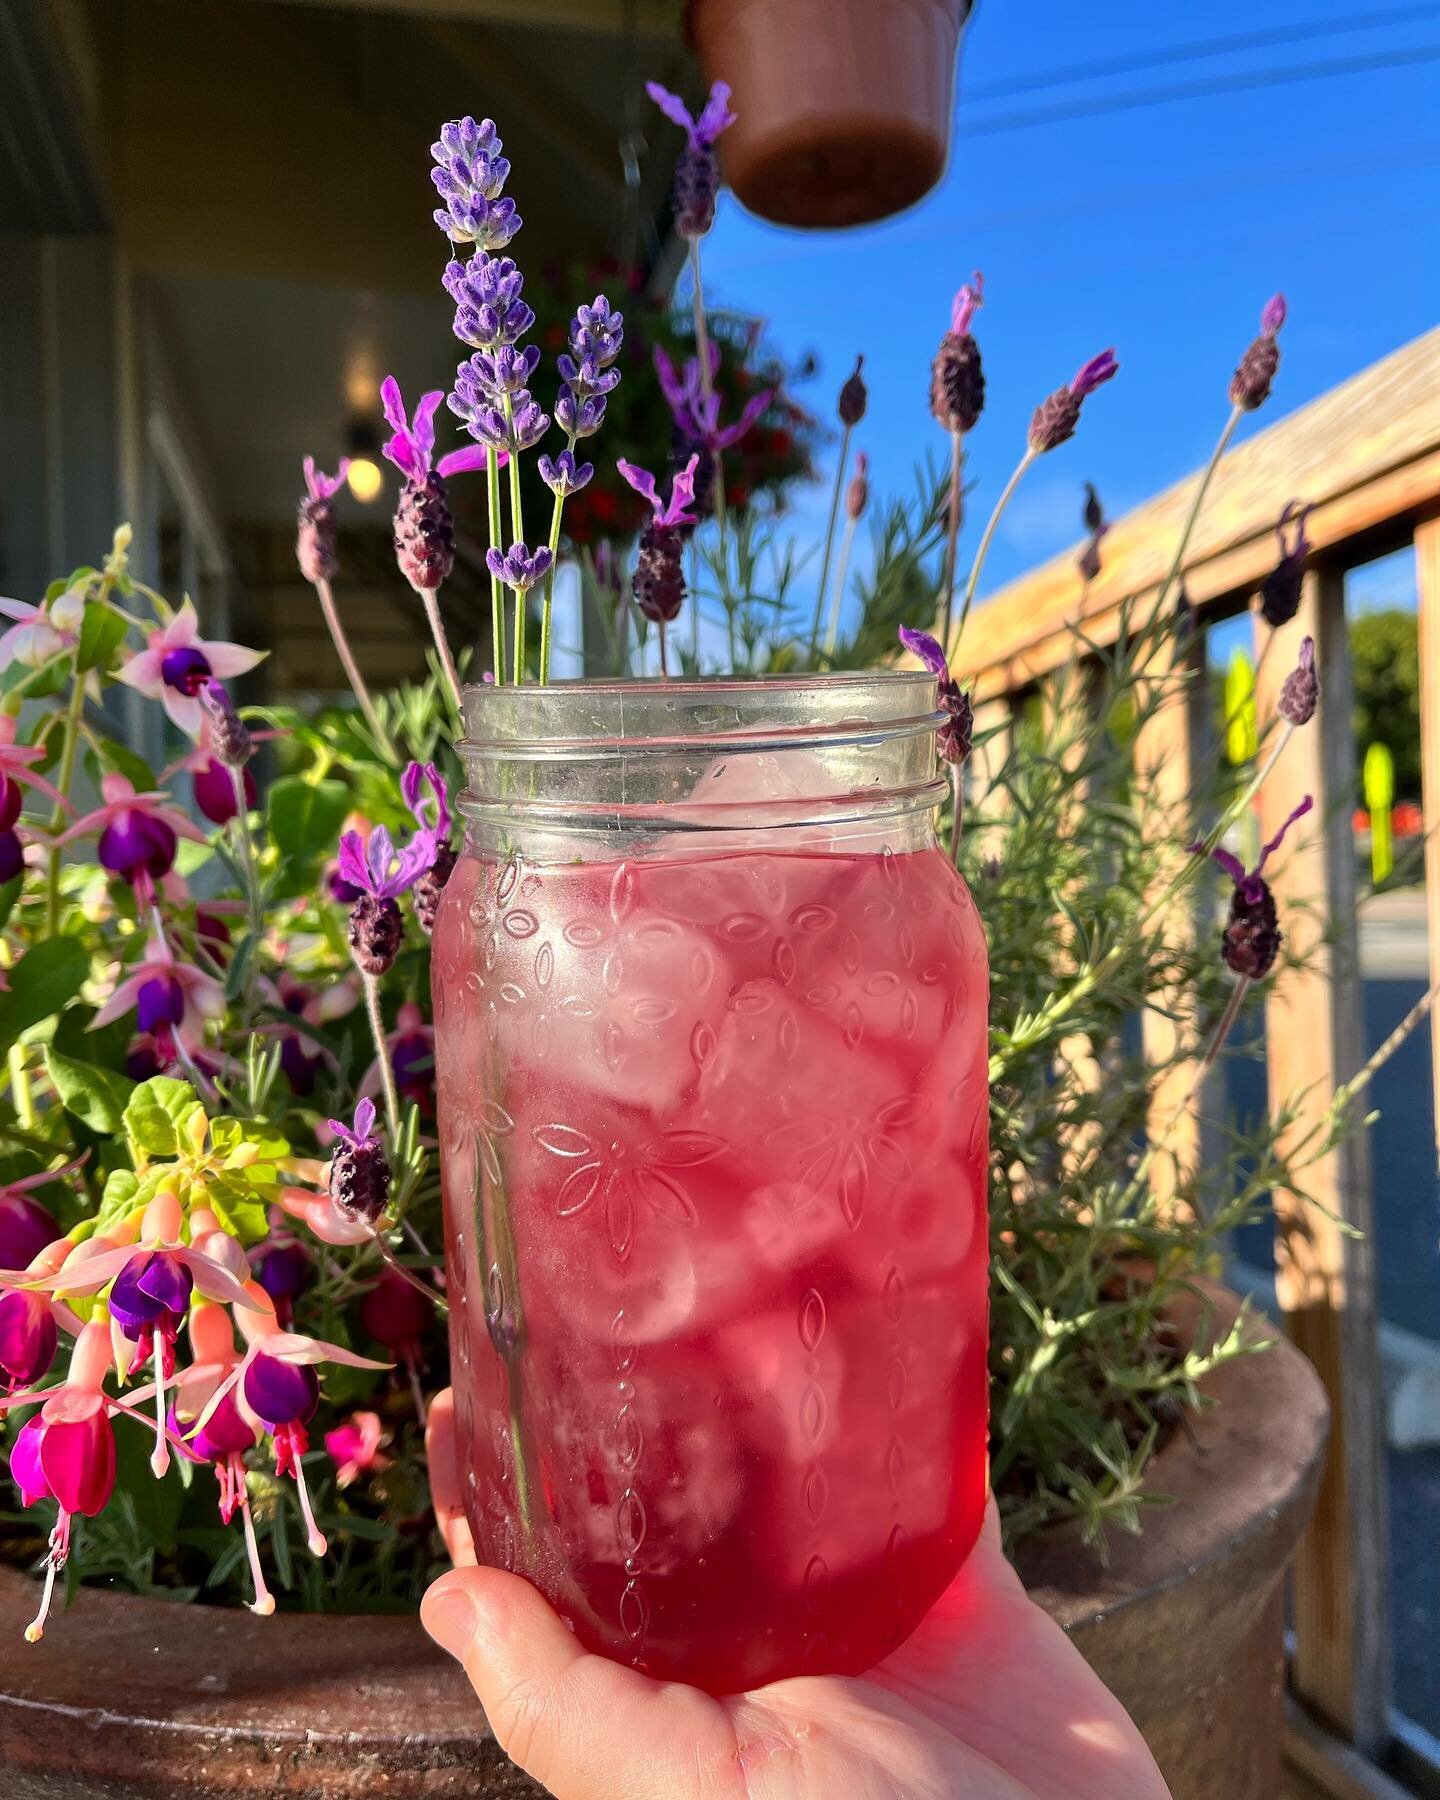 Happy Lavender Festival weekend! We&rsquo;re serving up our Lemon Lavender iced tea from @goodnessteatime 💜 We even have some house made lavender syrup if you want to add a little extra sweetness. Come say hi today or tomorrow! #buenaluz #bakery #po